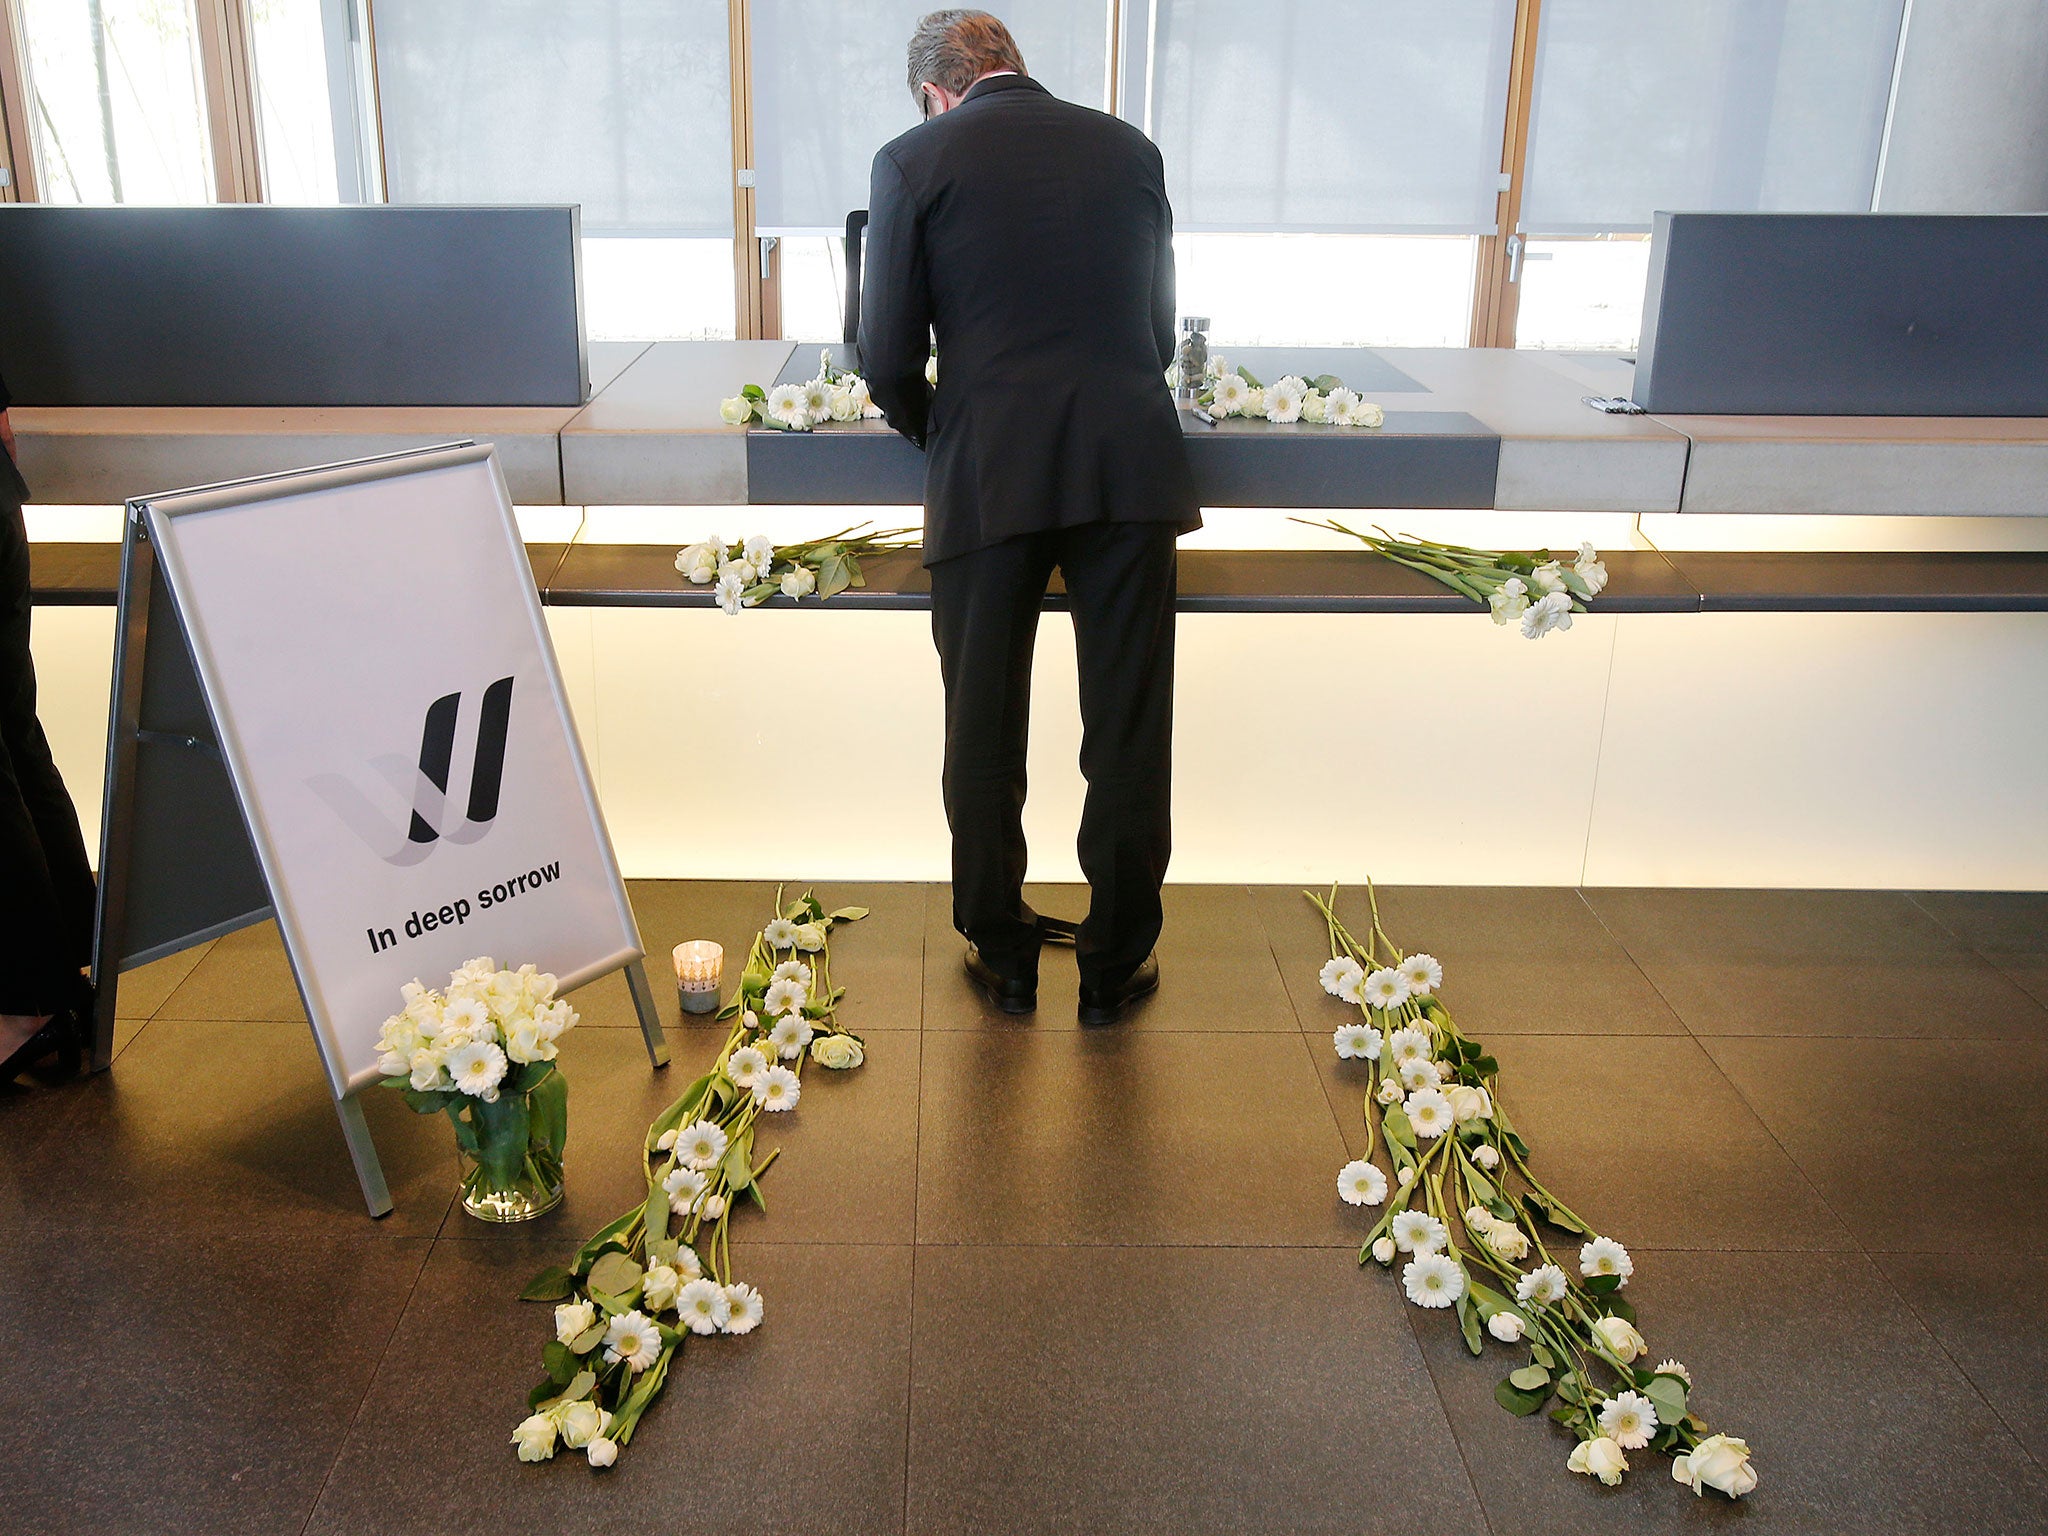 A Lufthansa employee signs in a condolence book in Frankfurt, Germany